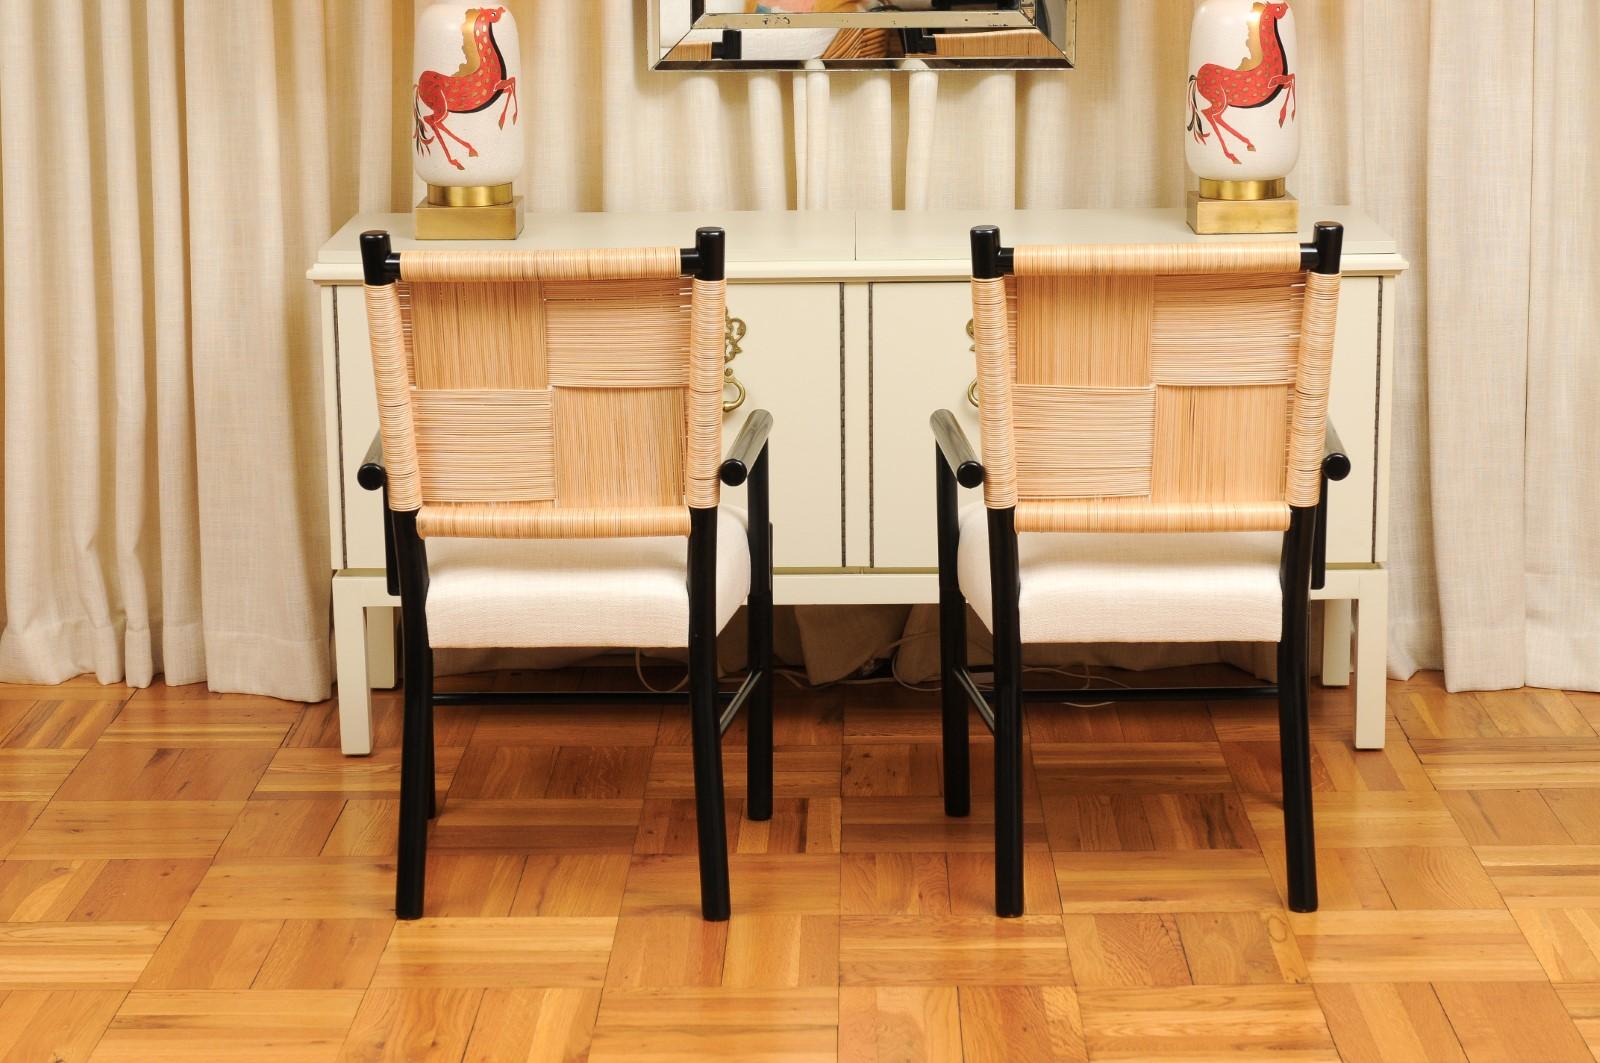 All Arms- Sublime Set of 14 Cane Back Dining Chairs by John Hutton for Donghia For Sale 5